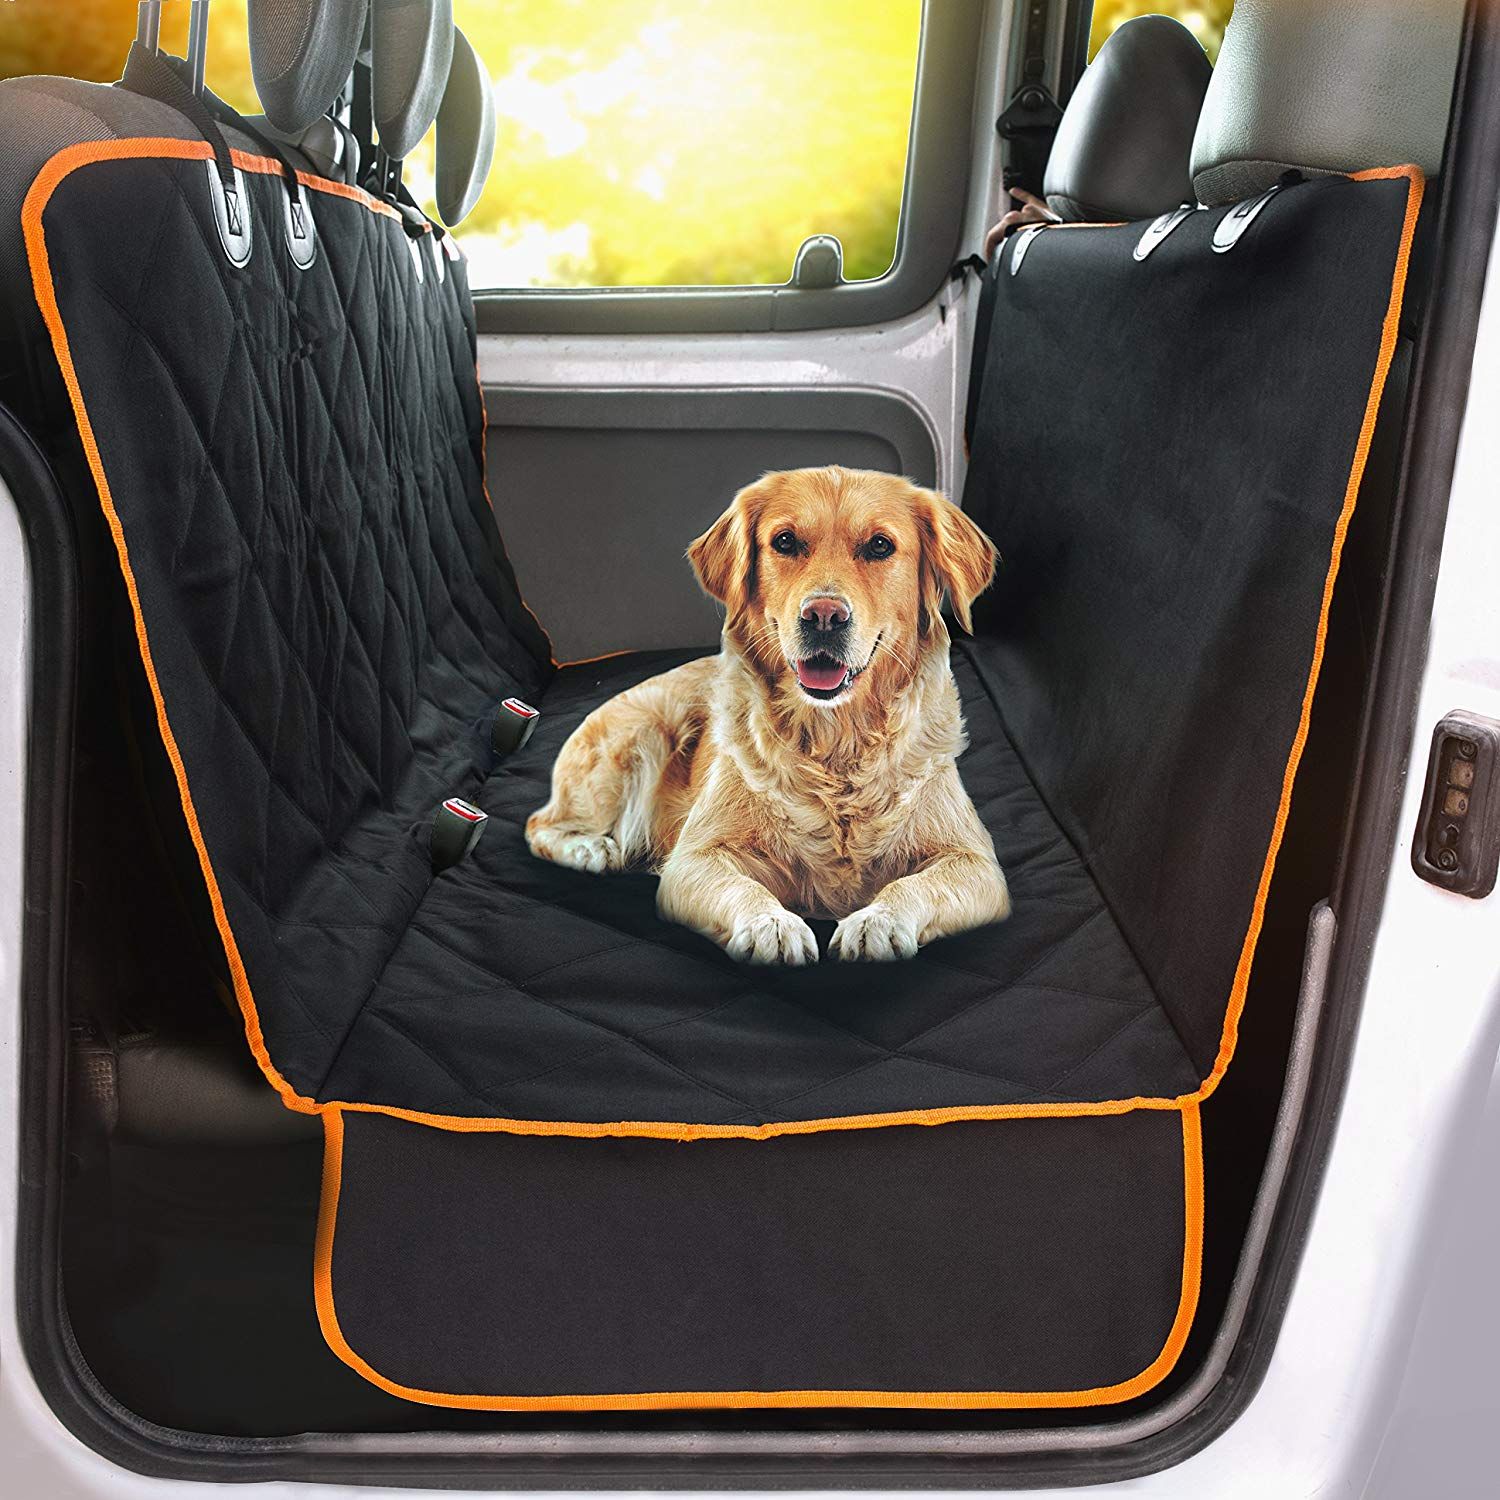 https://hips.hearstapps.com/hmg-prod/images/dog-seat-covers-primary-1557434493.jpg